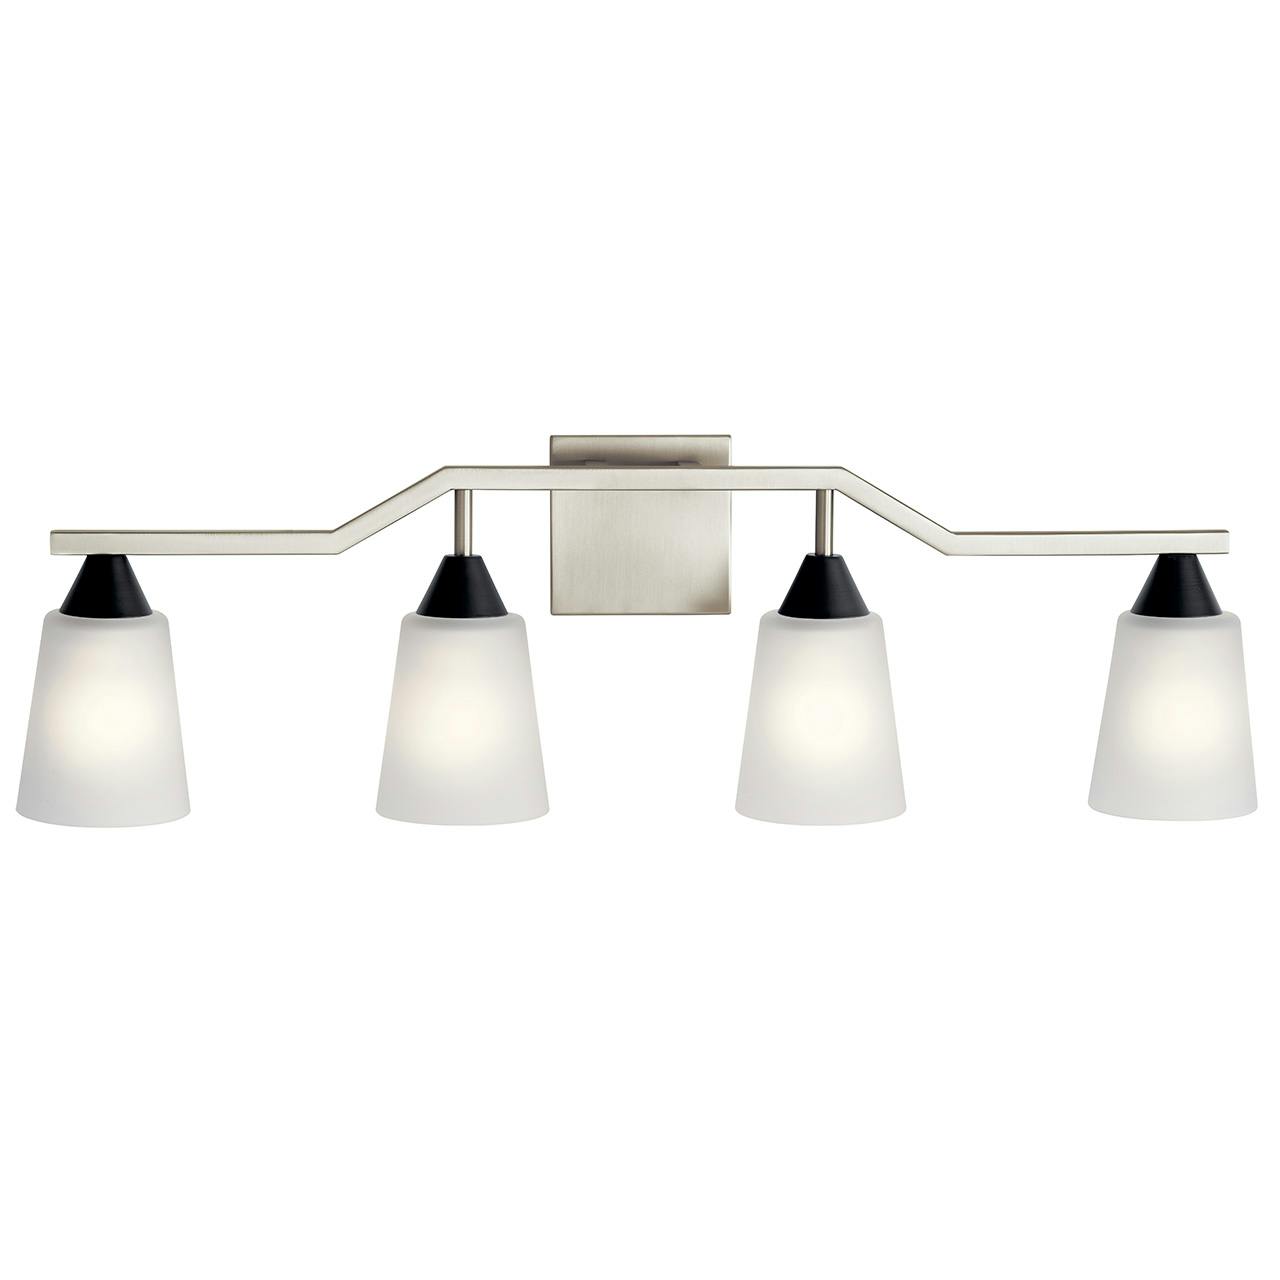 The Skagos 4 Light Vanity Light Nickel facing down on a white background